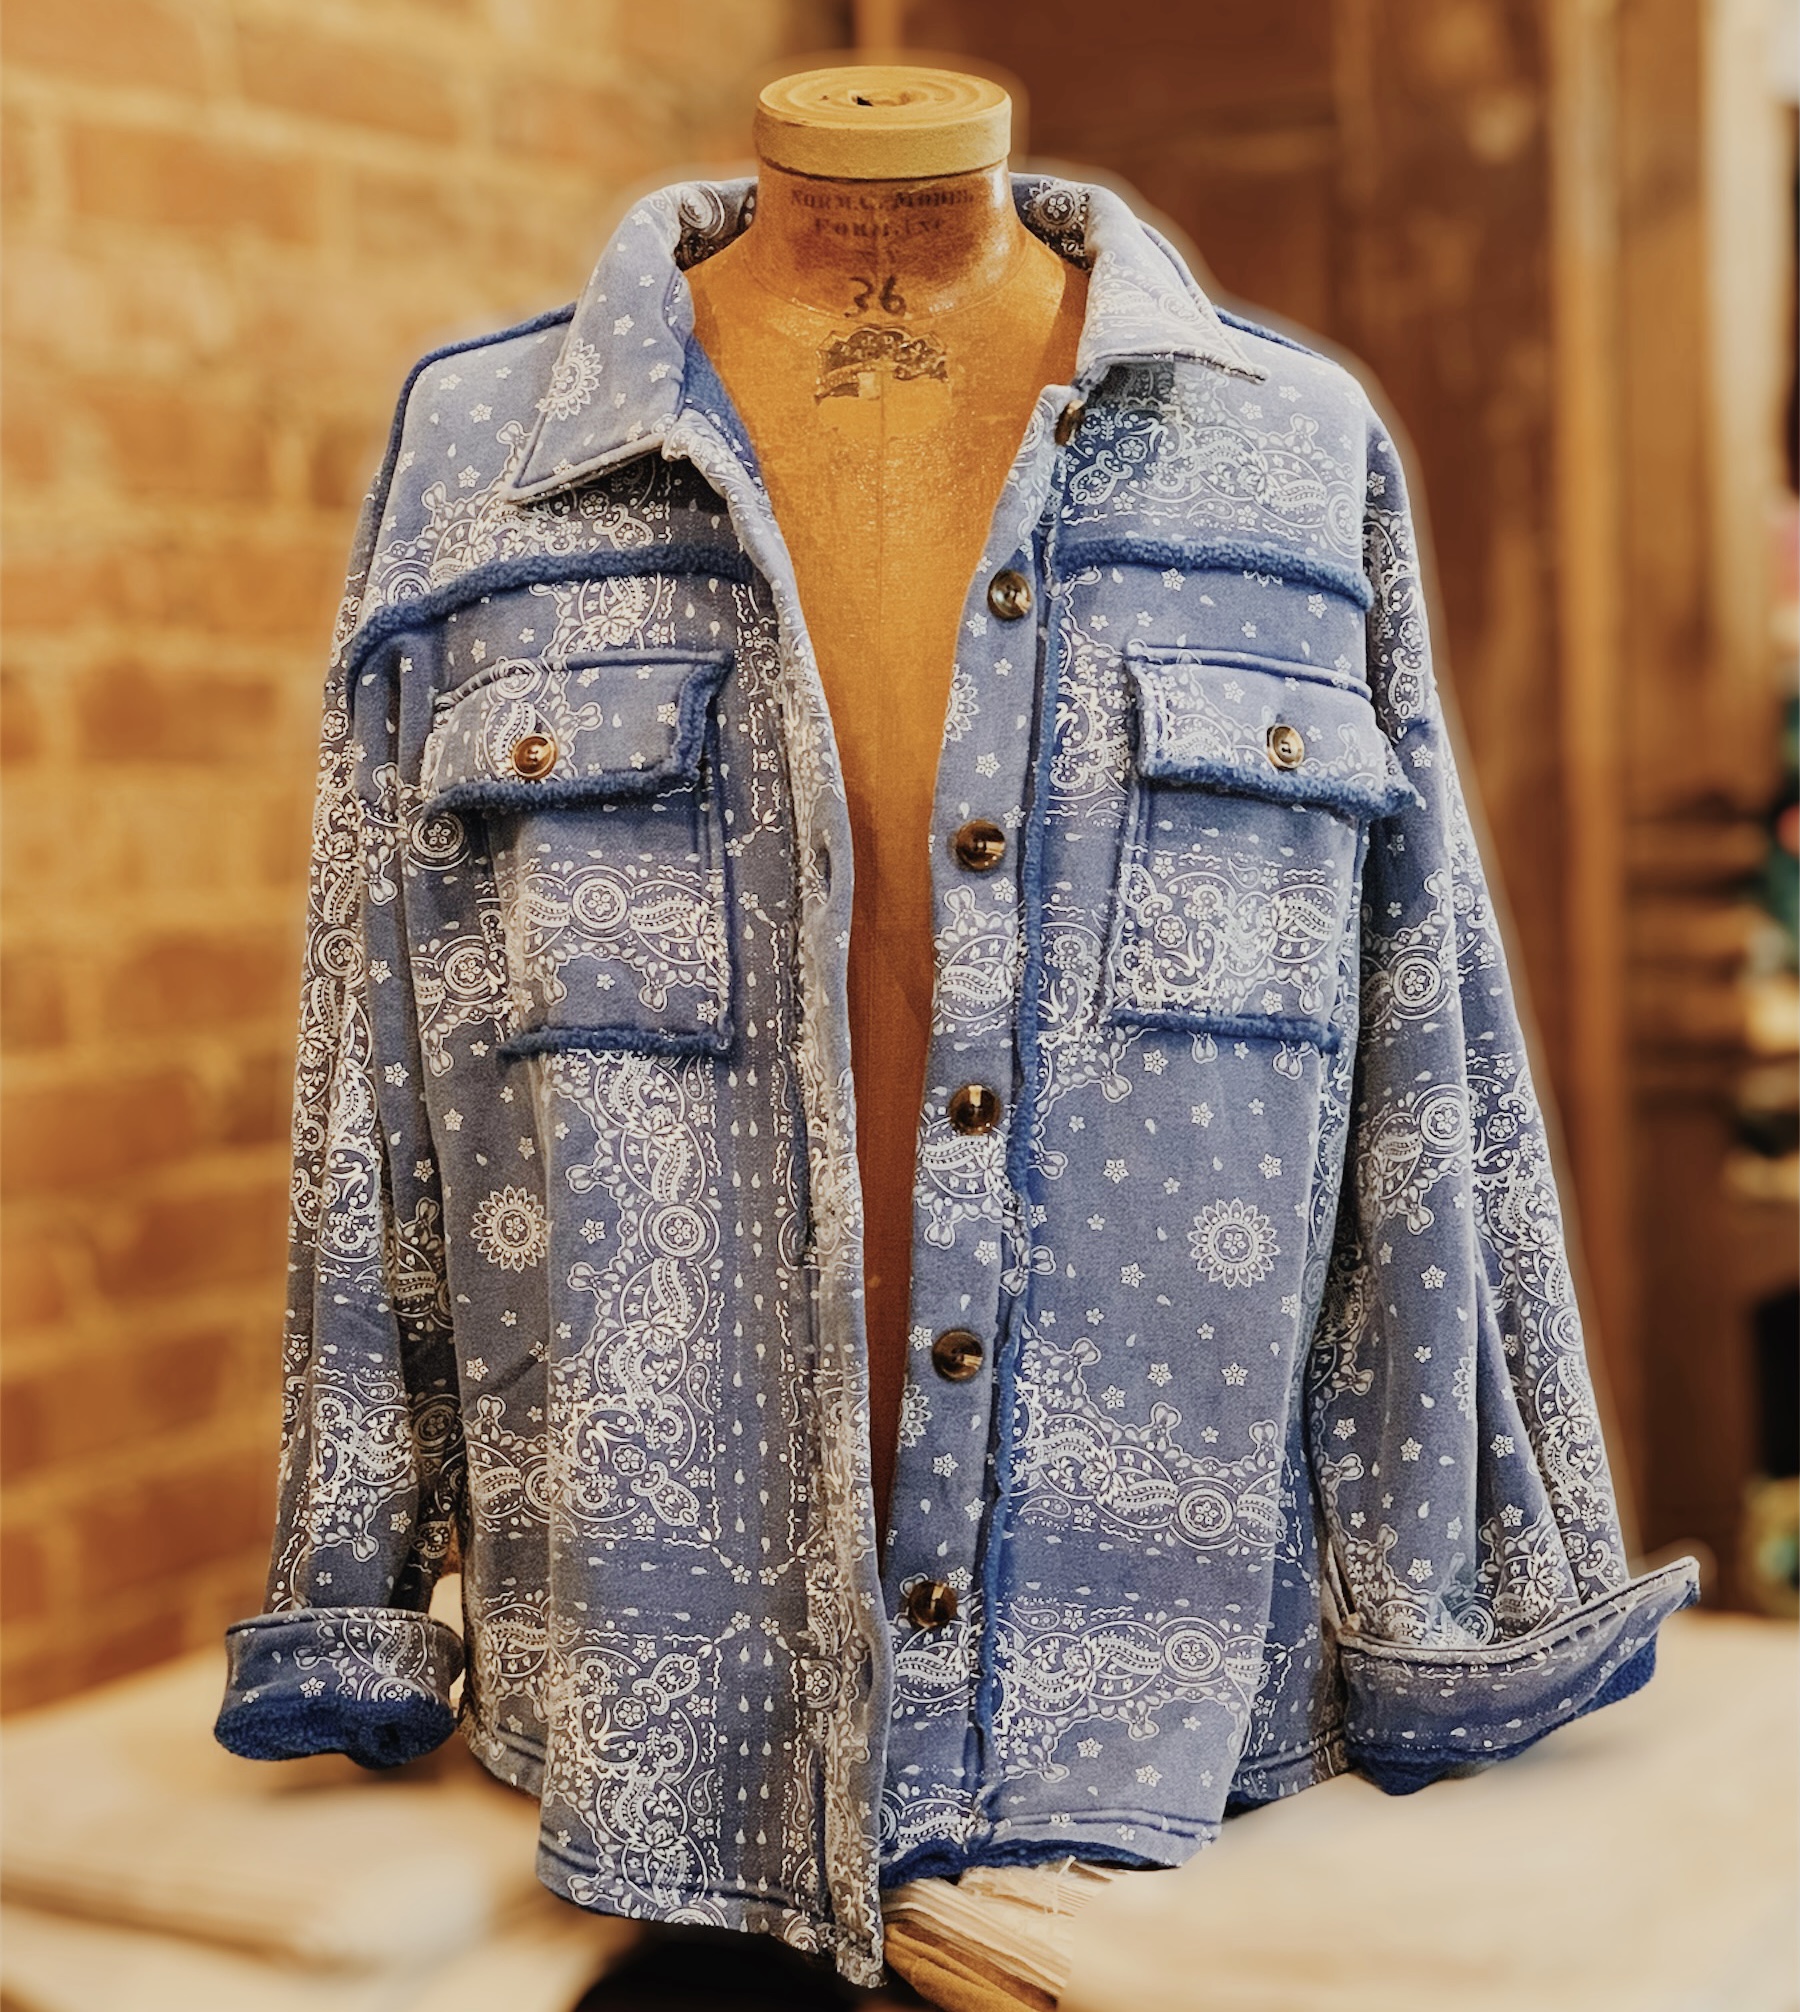 These blue bandana printed shackets are absolutely beautiful! With a thick, faux sherpa lining, these will keep you warm through the winter while also keeping you stylish!